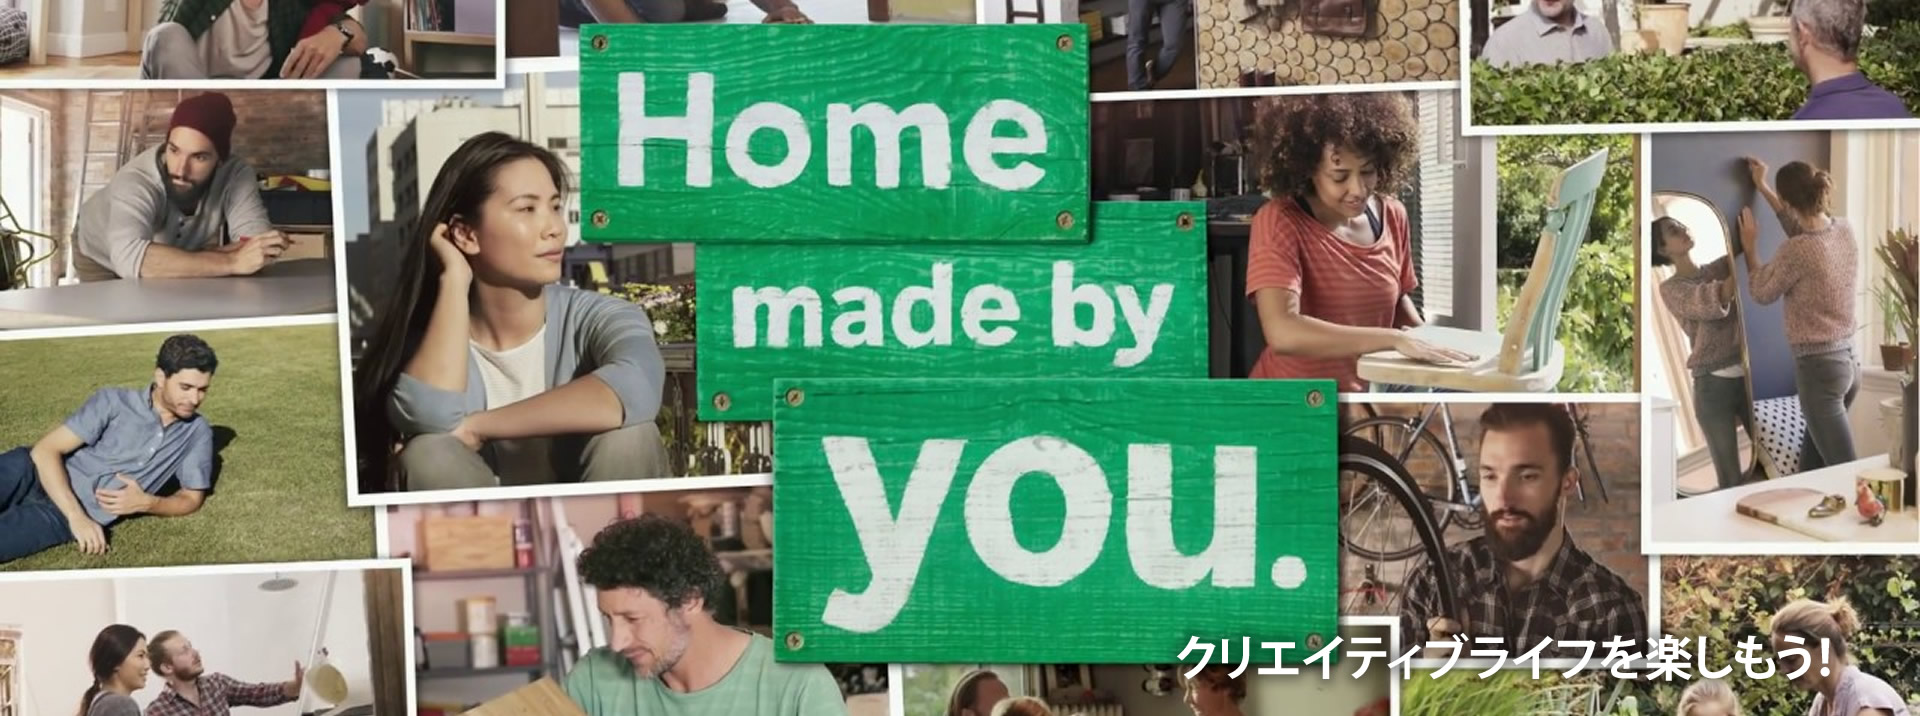 Home made by you. クリエイティブライフを楽しもう！